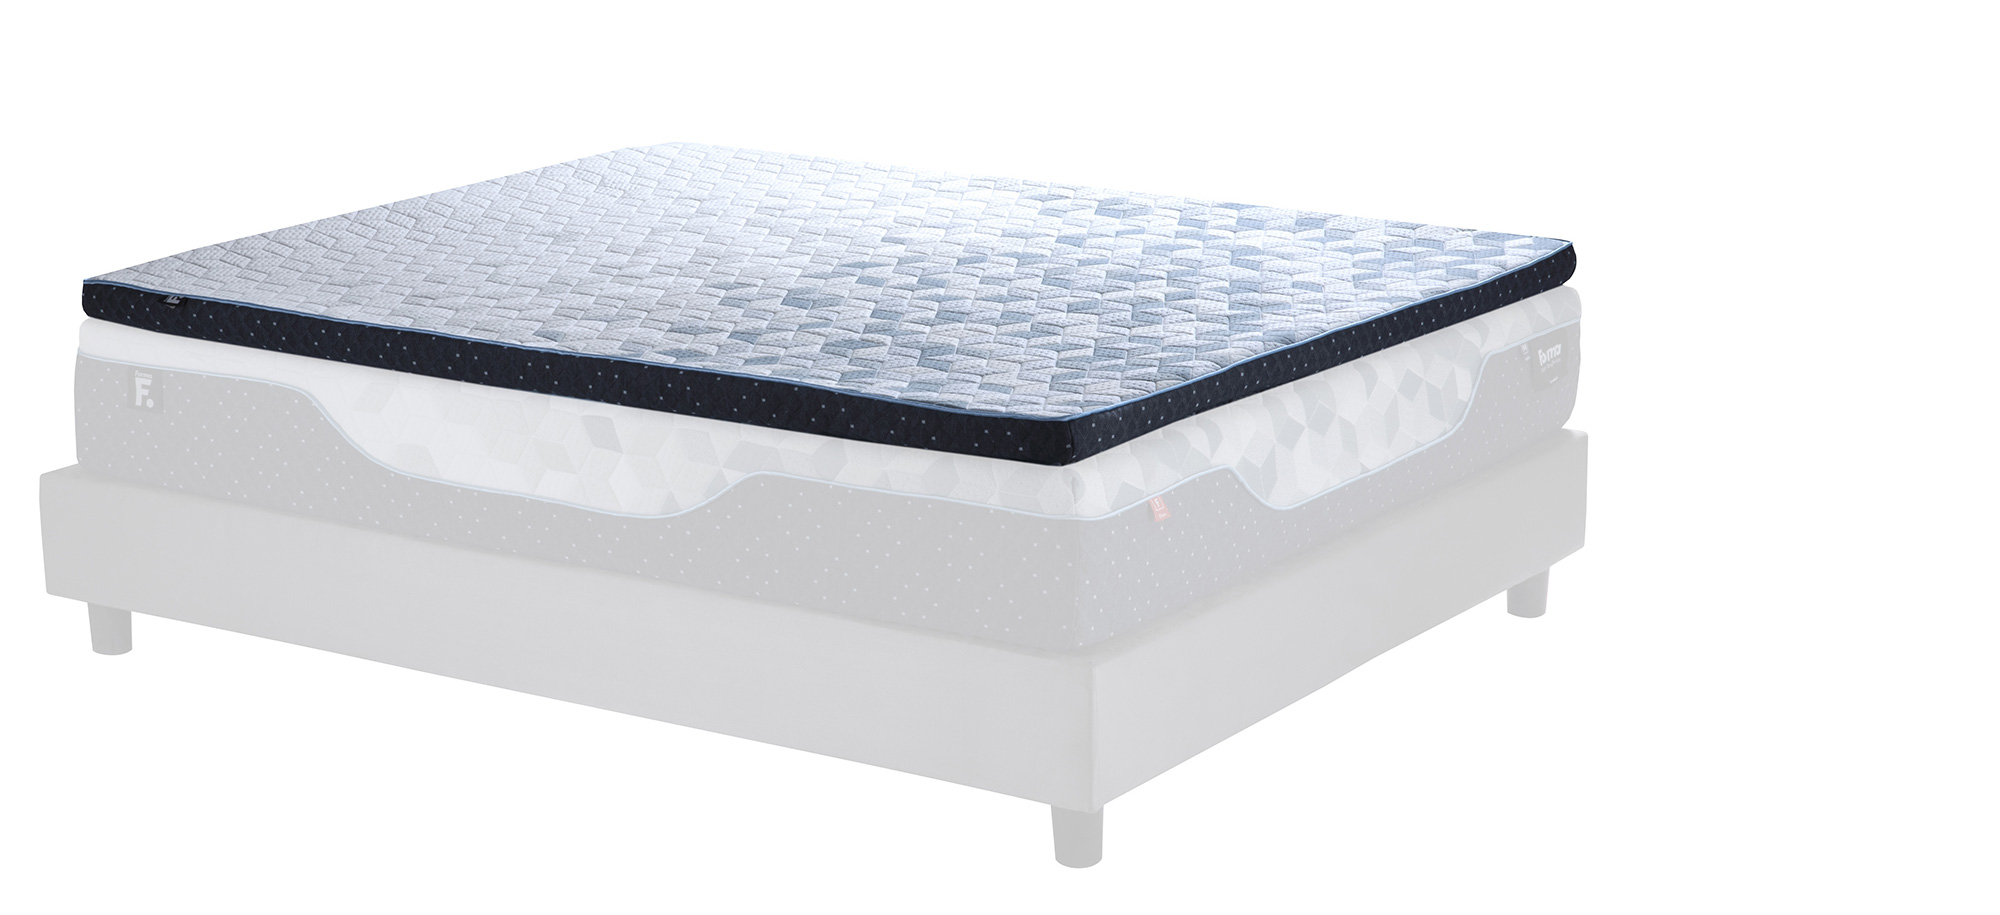 Materasso memory Roger – Materassi Forma Bed